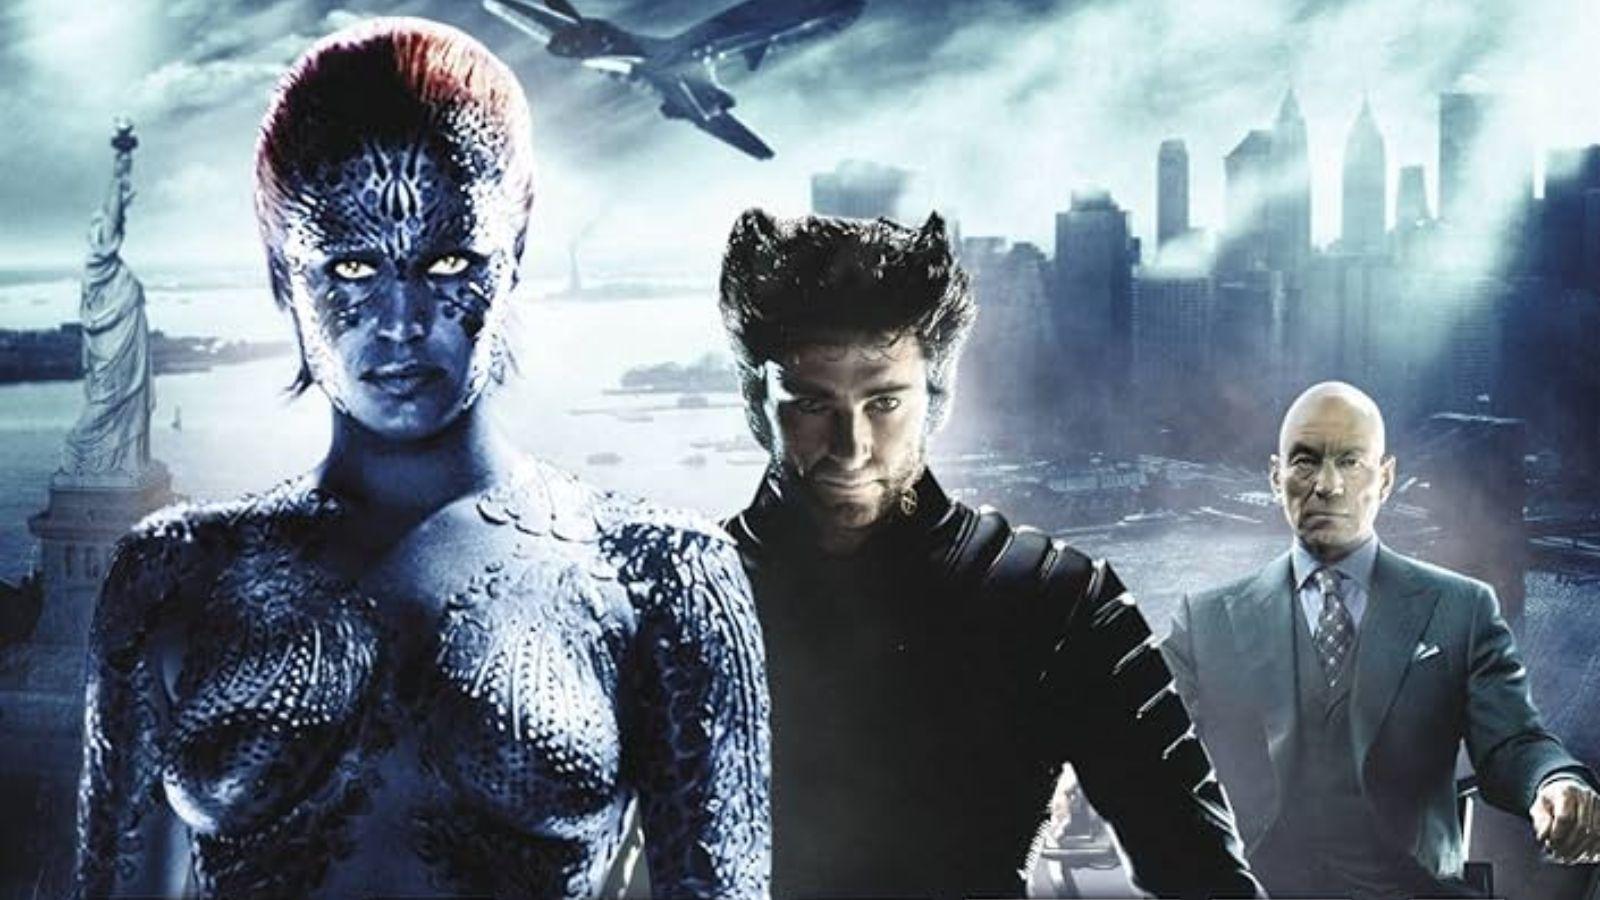 Mystique, Wolverine, and Professor X in an X-Men poster.